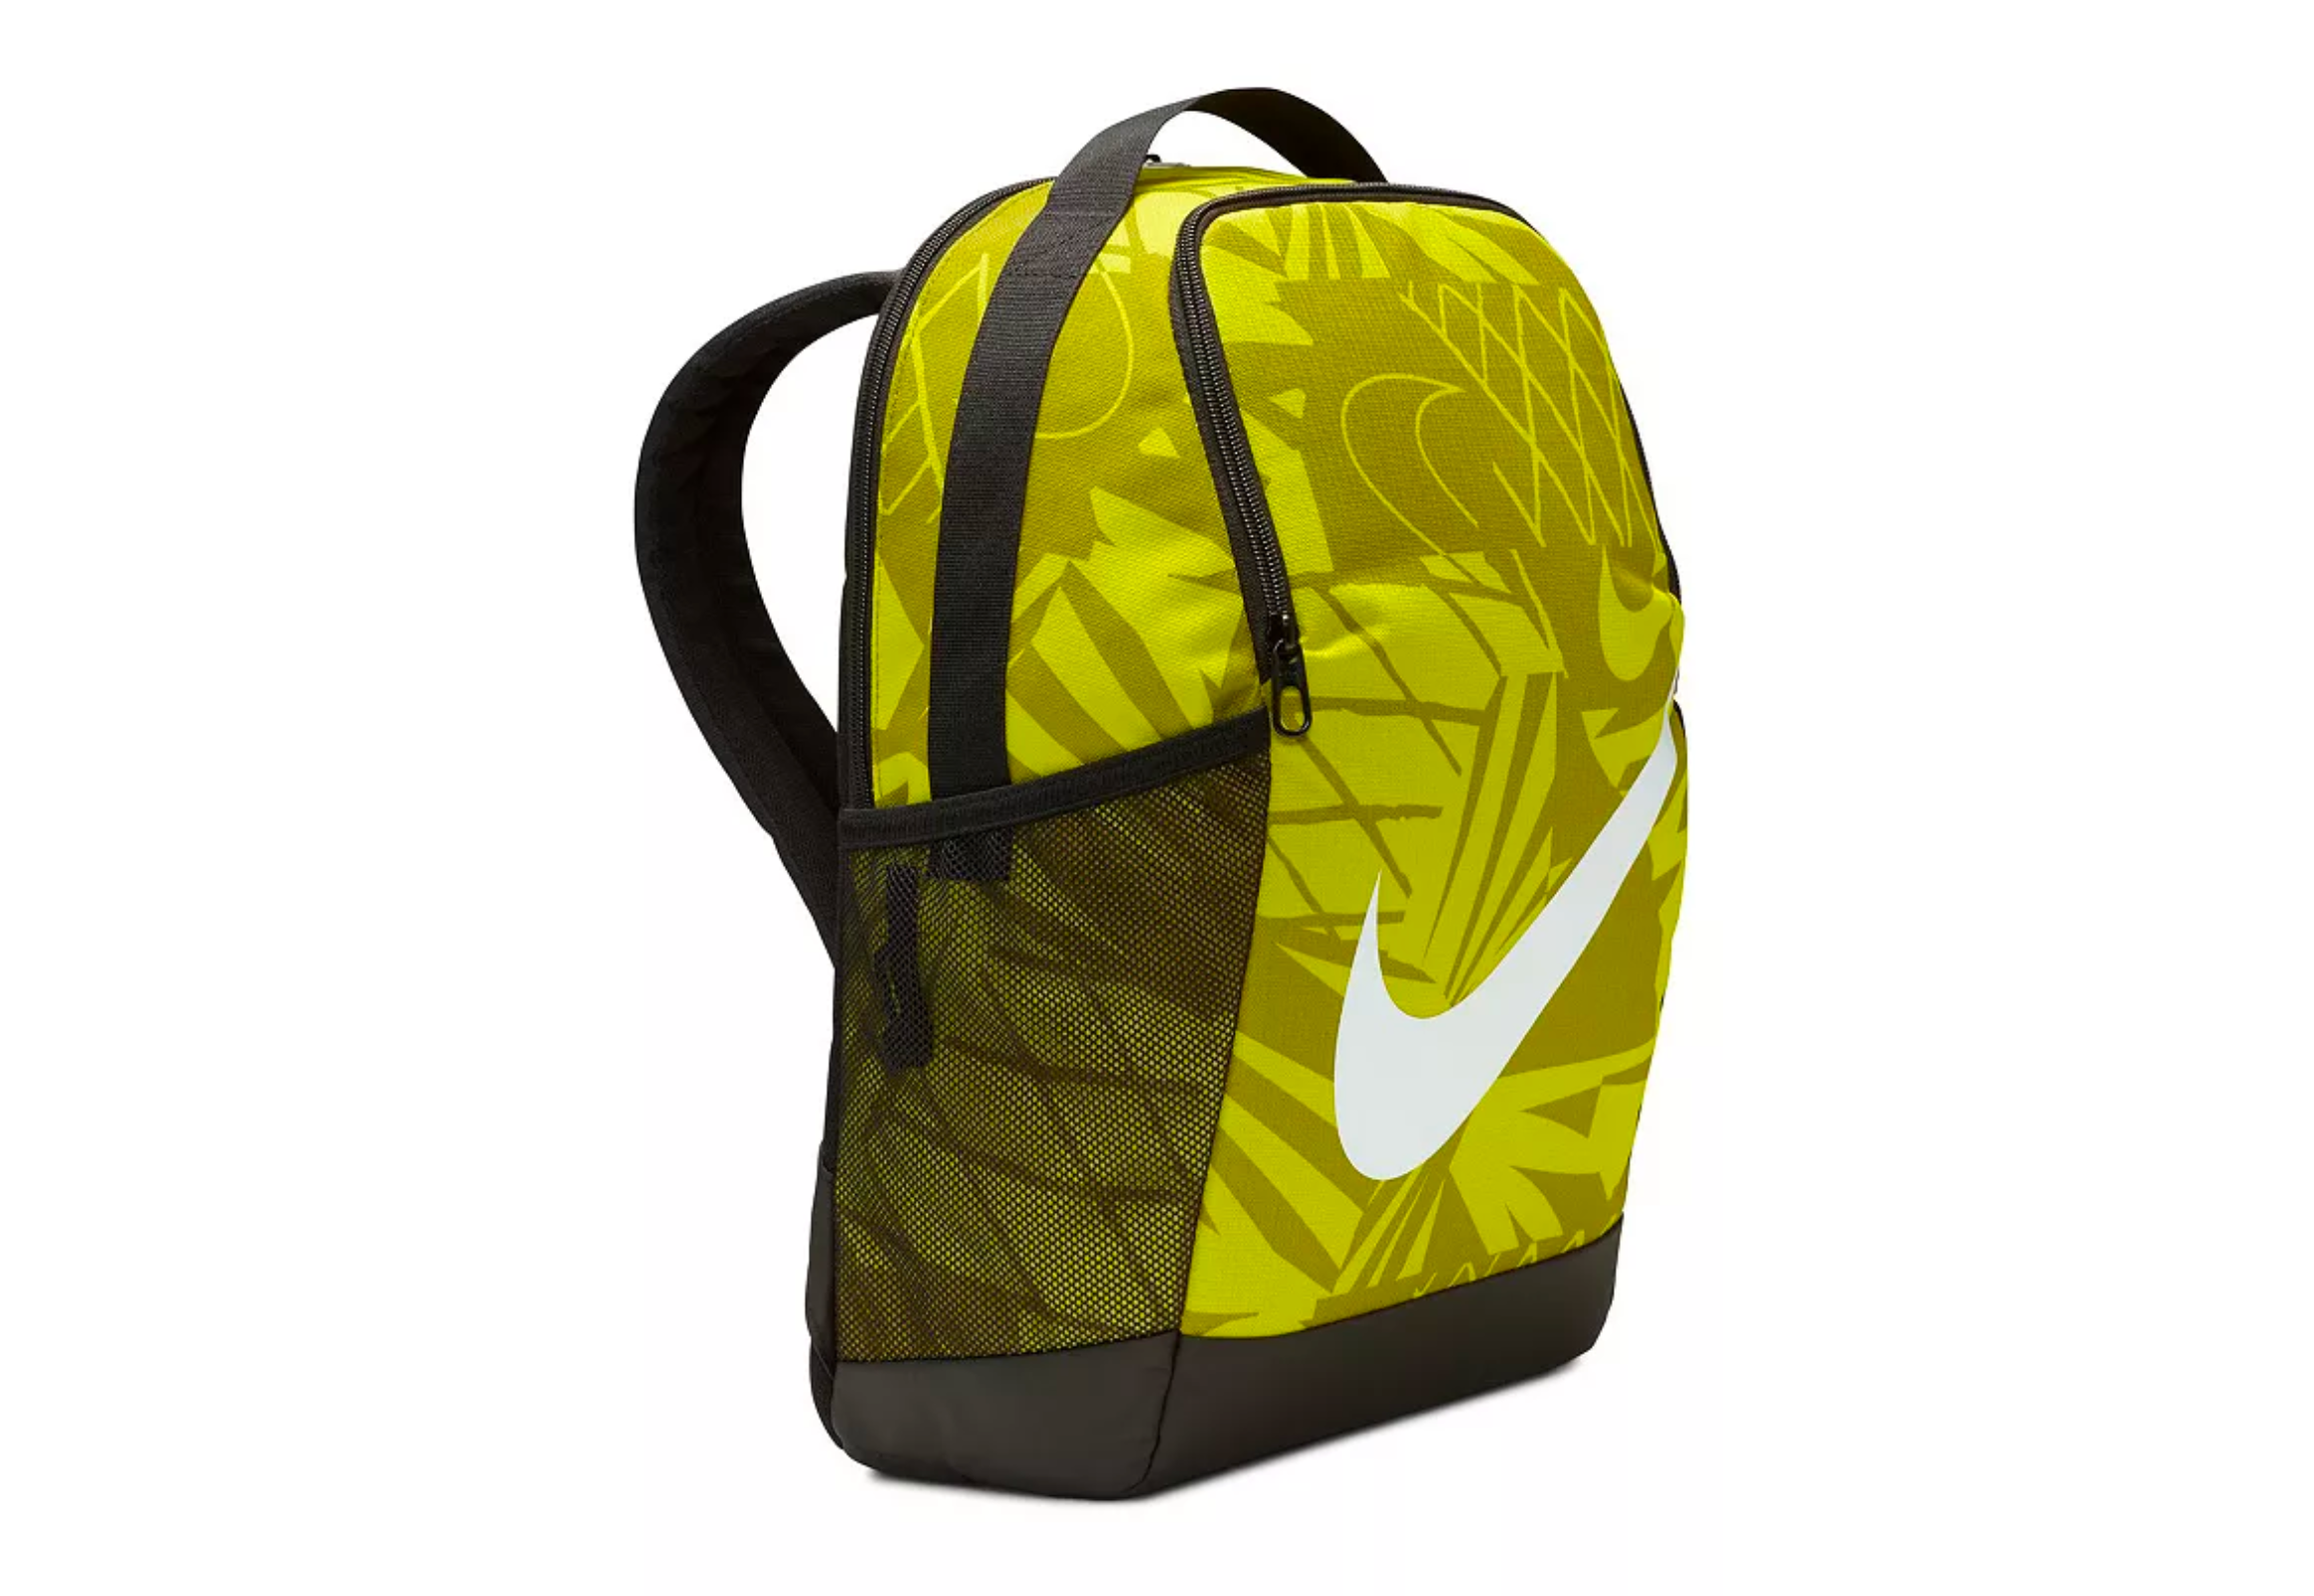 $23 Nike Backpacks & $17 Nike Lunch Bags at Kohl's on Clearance